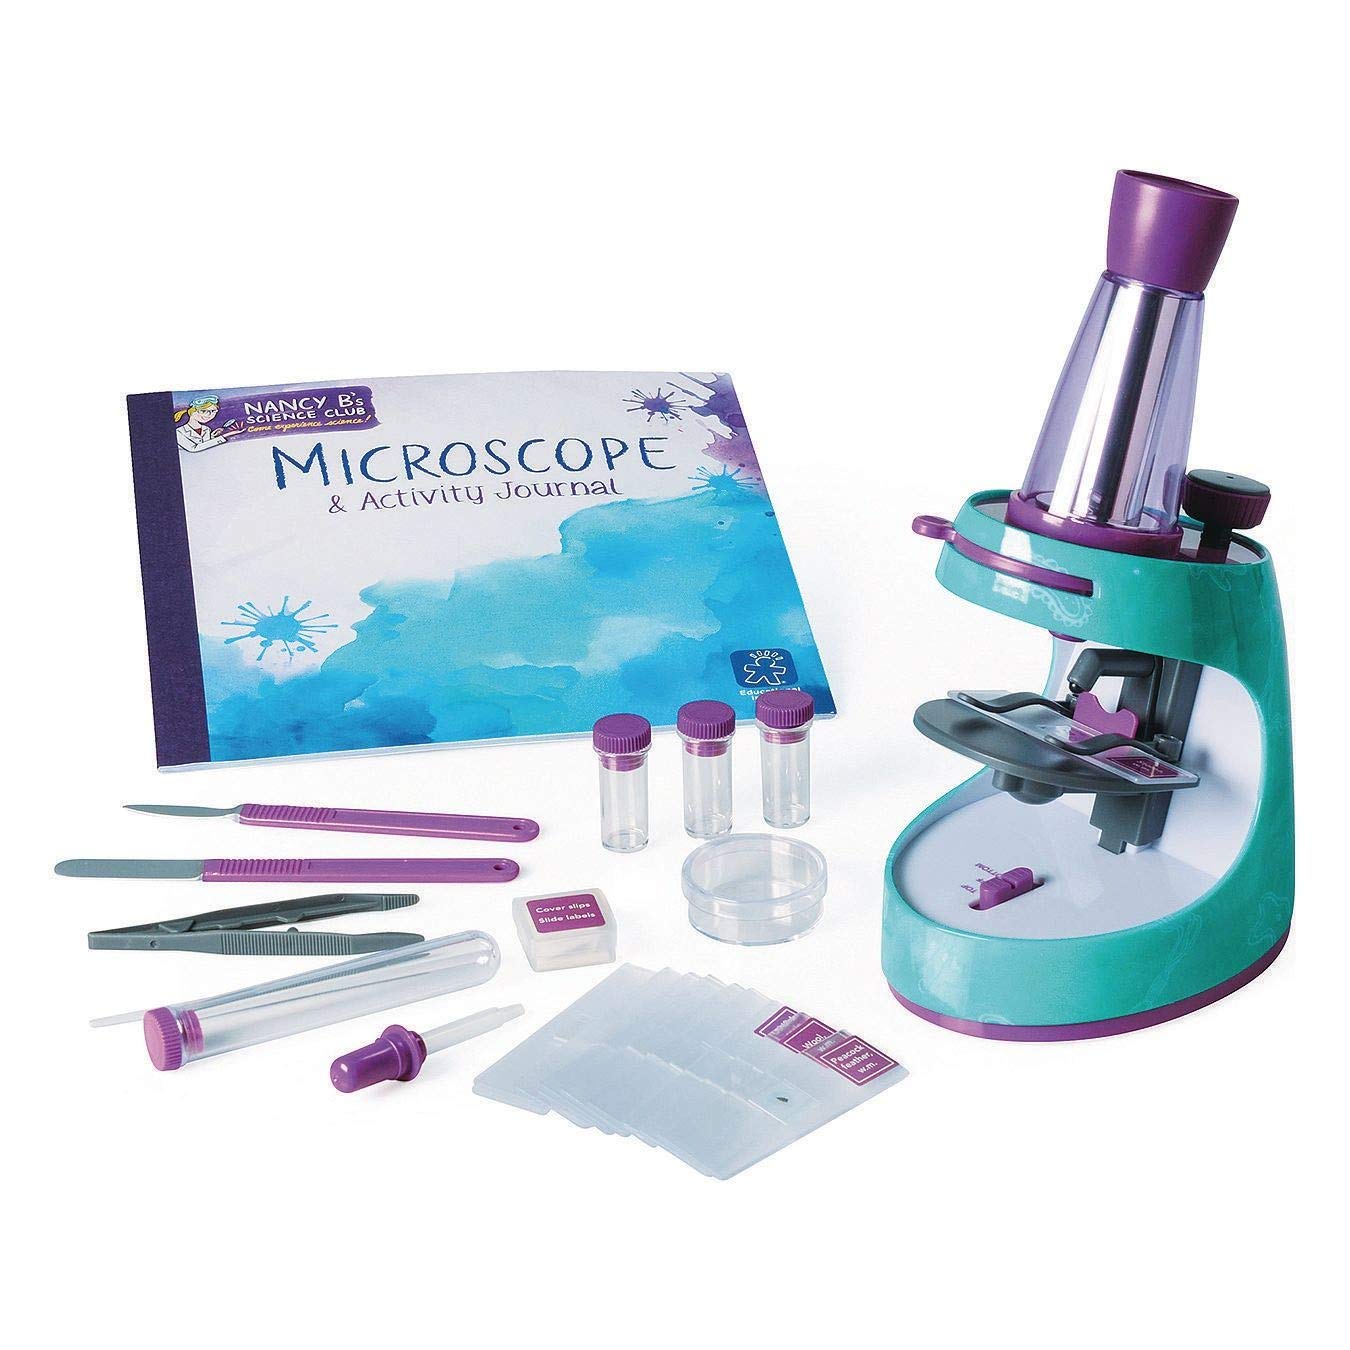 Top 10 Best Microscope for Kids Reviews in 2022 8